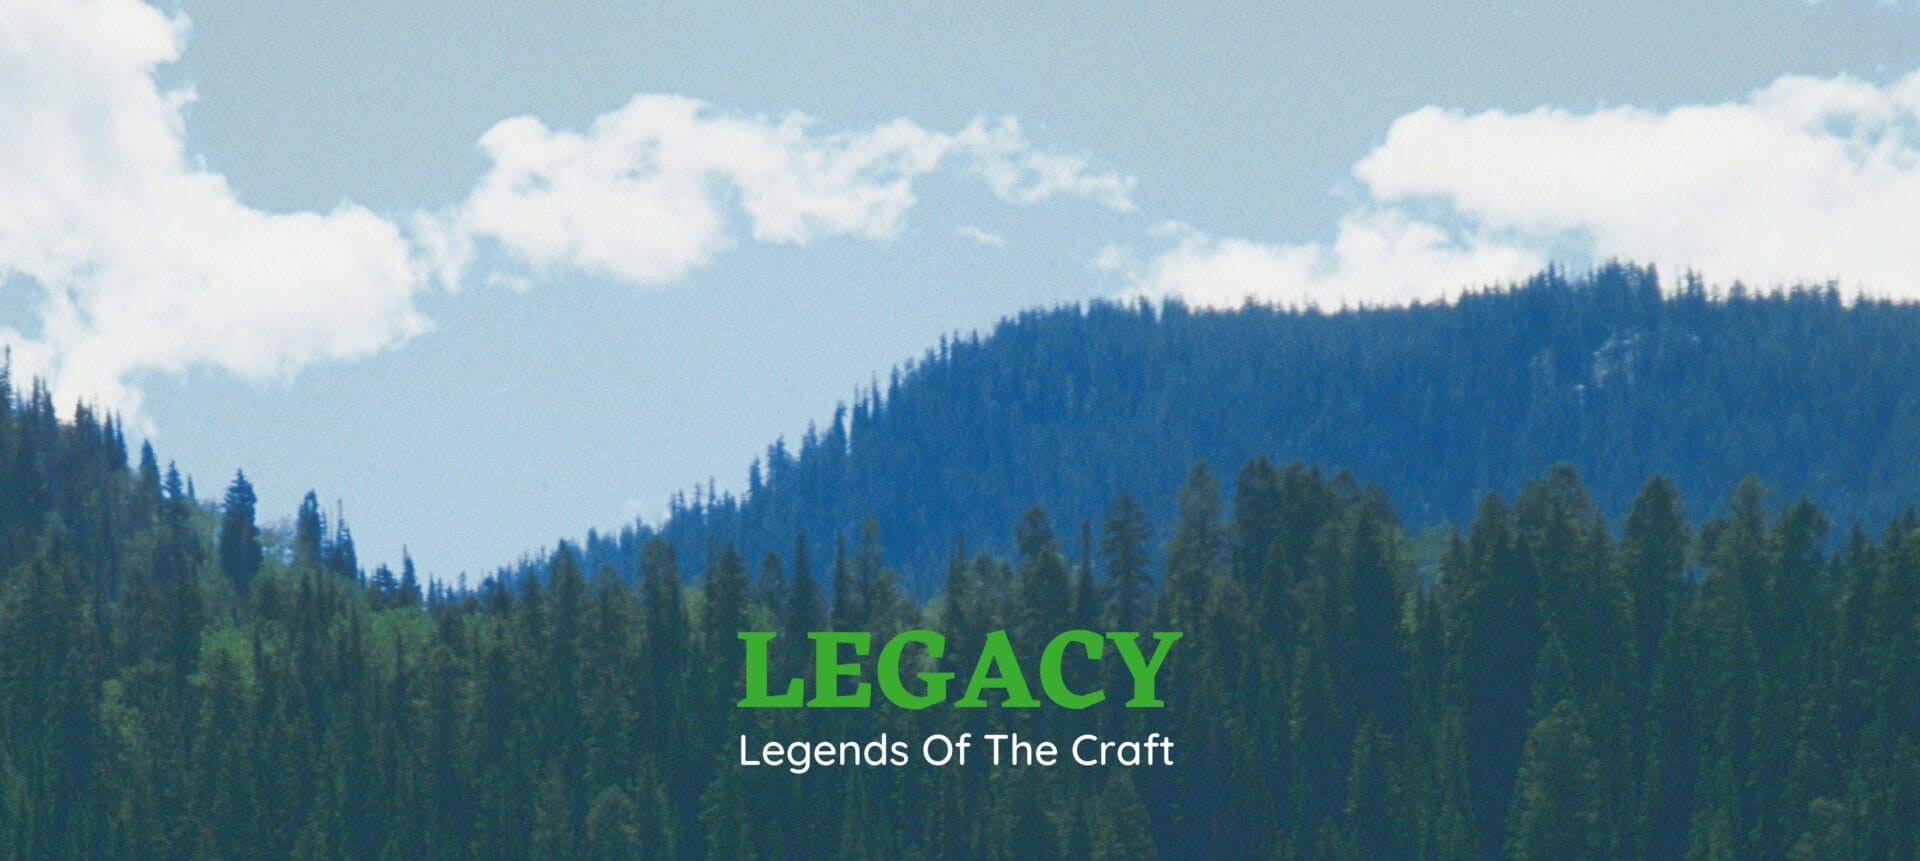 BRAND PAGE - LEGACY